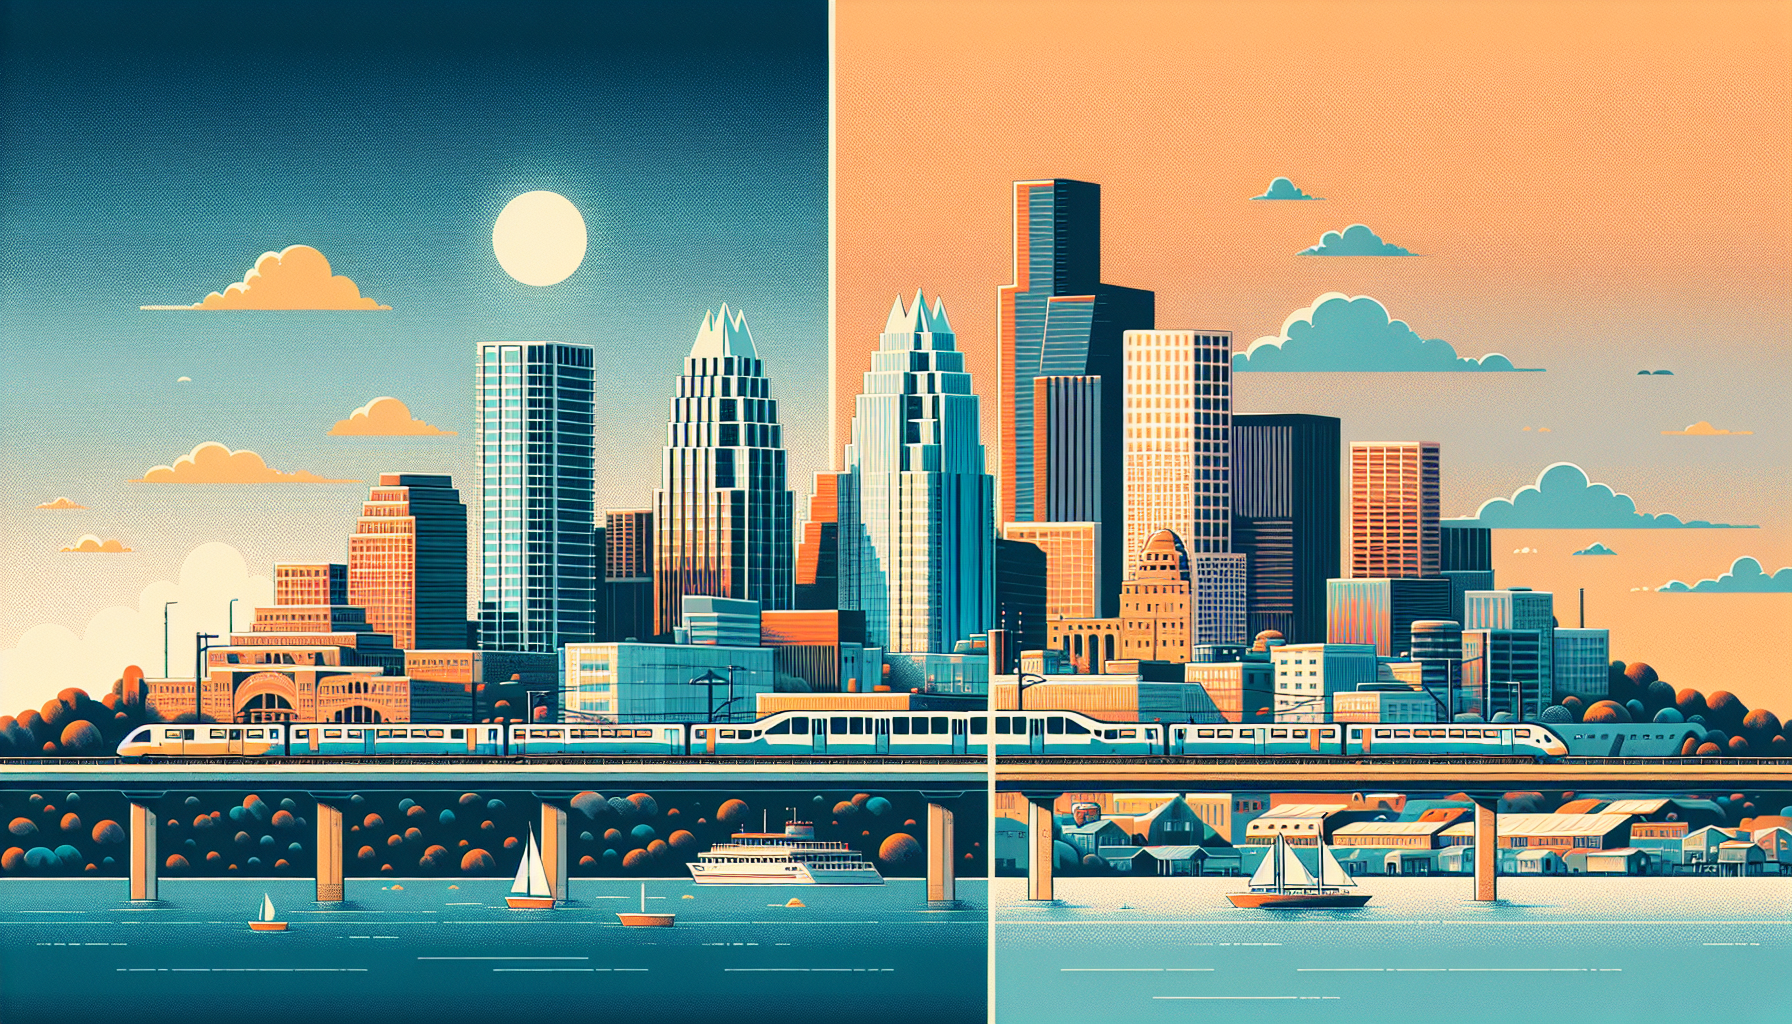 Comparing transportation in Austin and Seattle, showcasing the cityscapes and commuting experiences